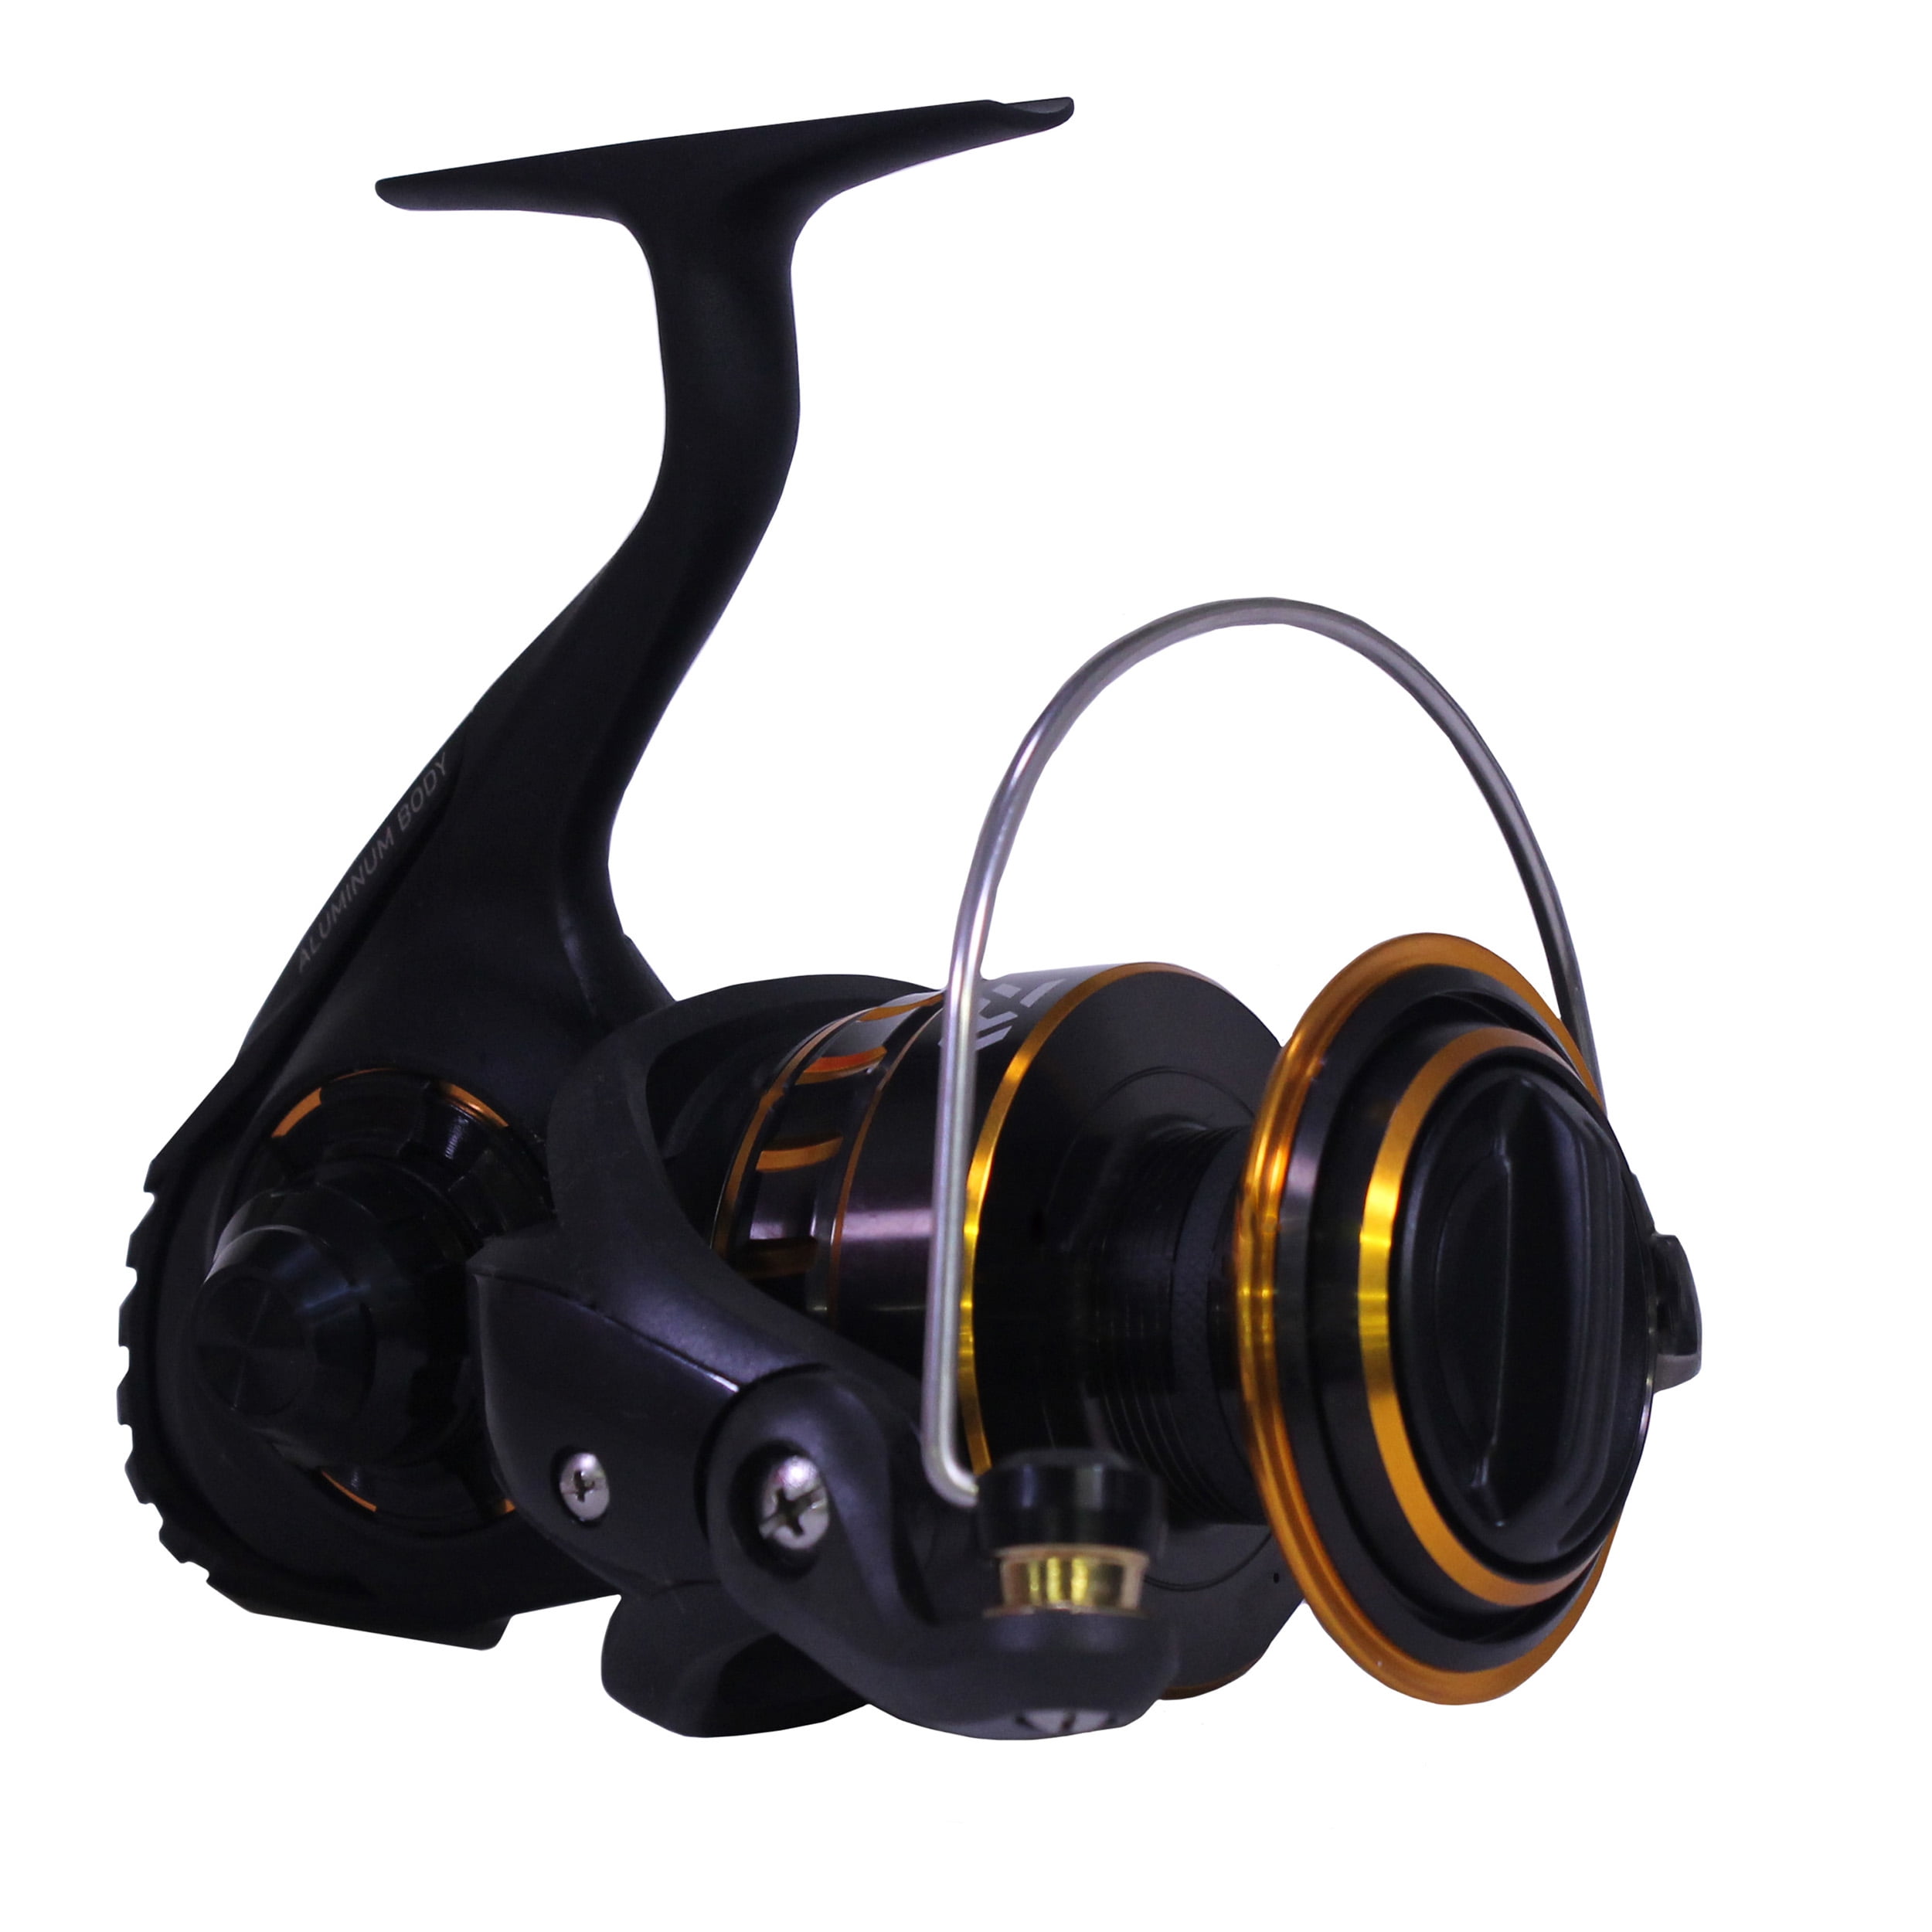 Quantum Smoke Baitcast Fishing Reel, Size 100 Reel, Right-Hand Retrieve,  Large EVA Handle Knobs and Continuous Anti-Reverse Clutch, 10+1 Bearings,  8.1:1 Gear Ratio, Black 